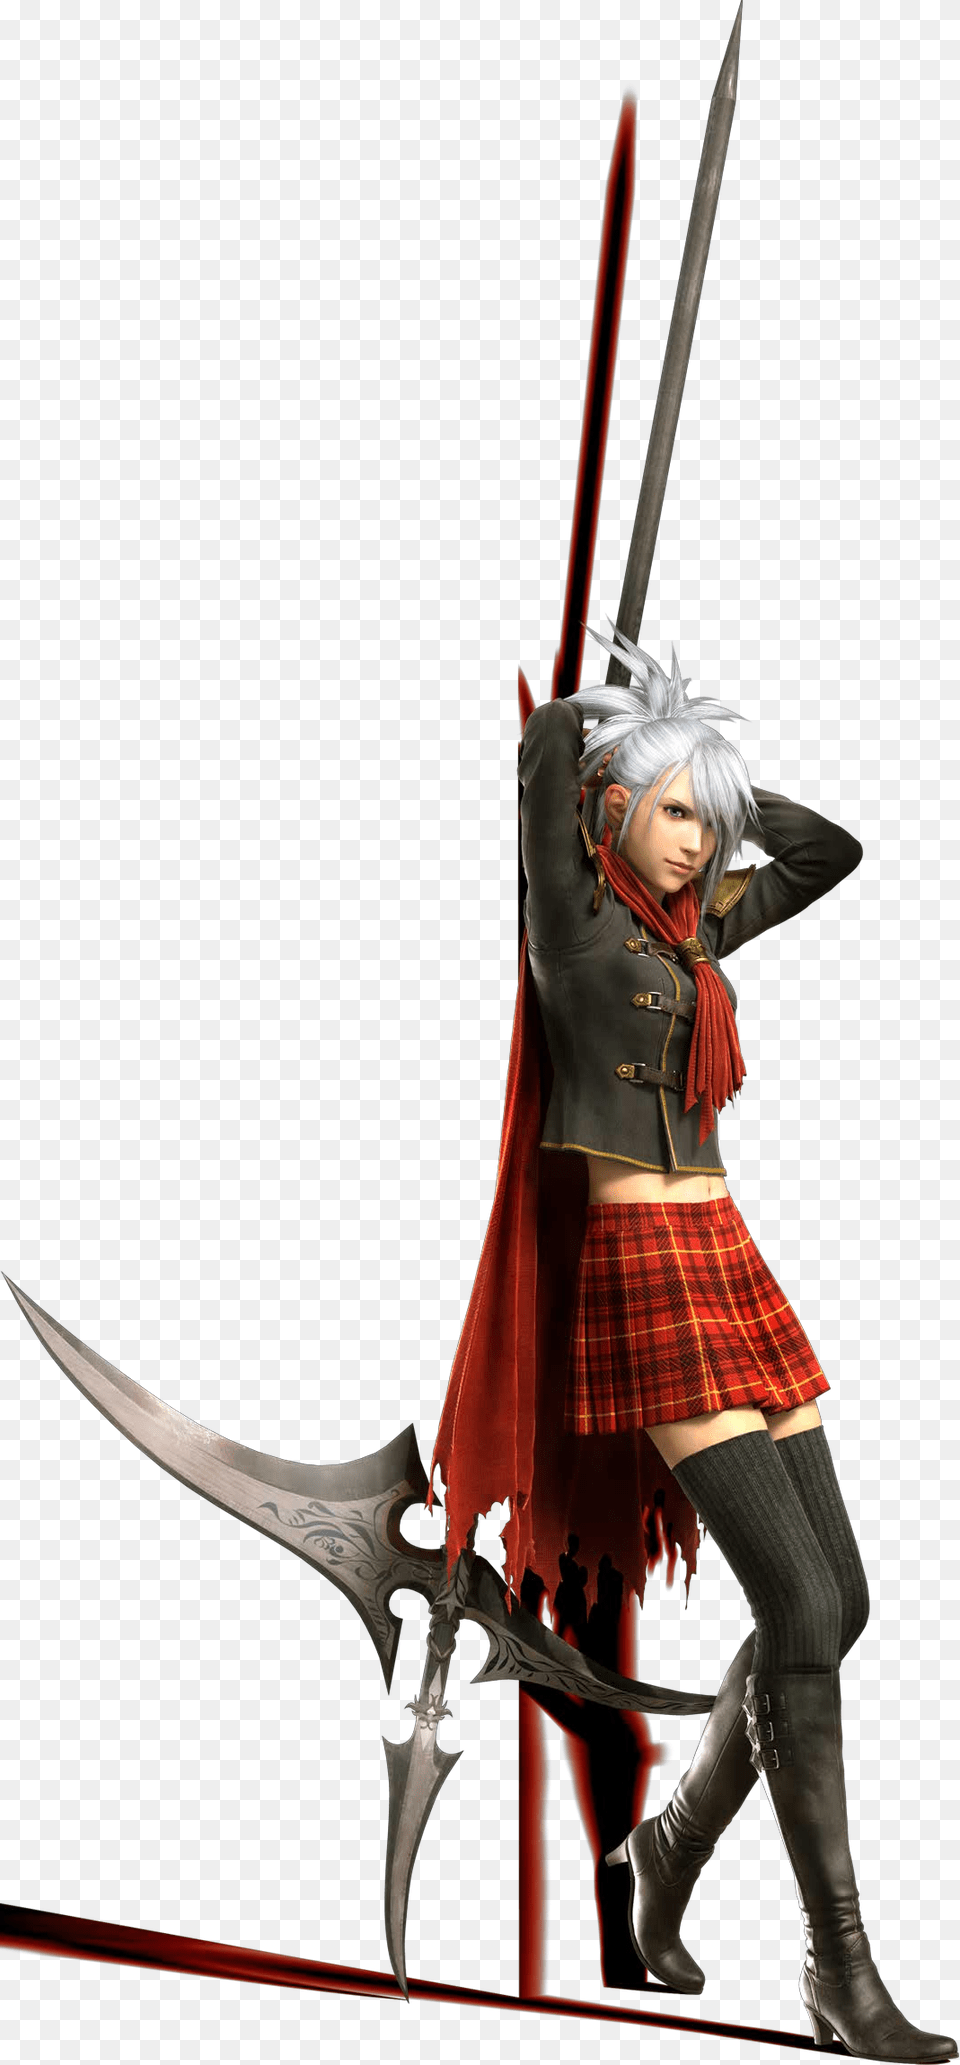 Final Fantasy Type 0 Hd Wear, Weapon, Sword, Adult, Person Png Image